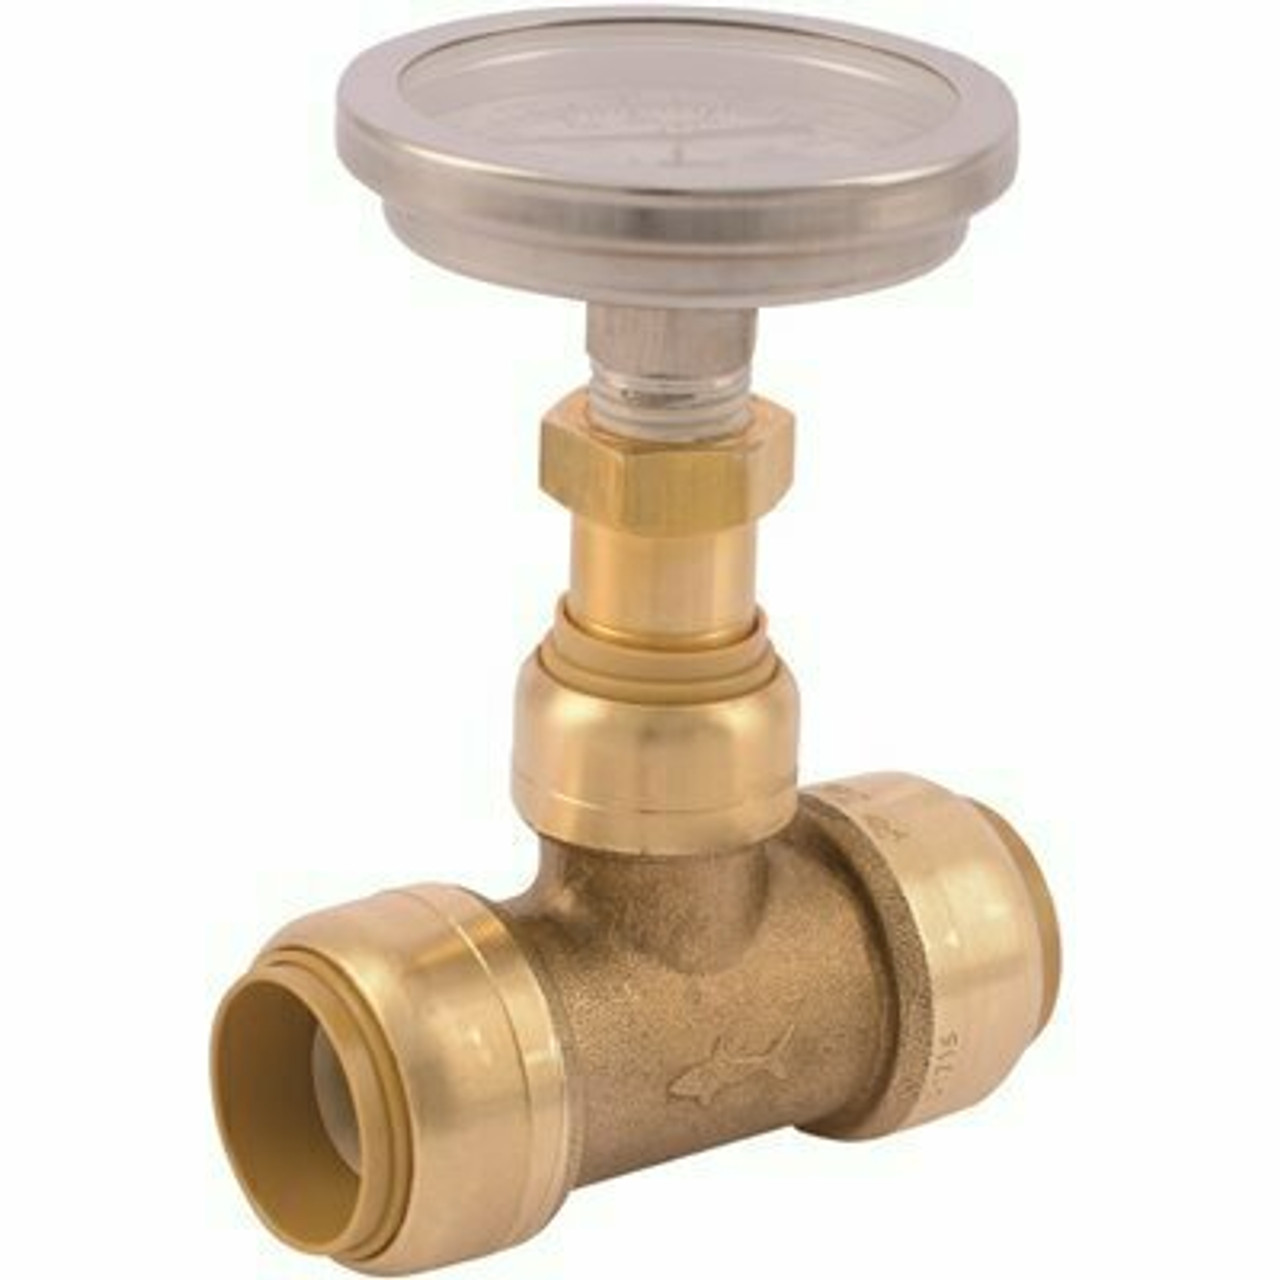 Sharkbite 3/4 In. Push-To-Connect Brass Tee Fitting With Water Temperature Gauge